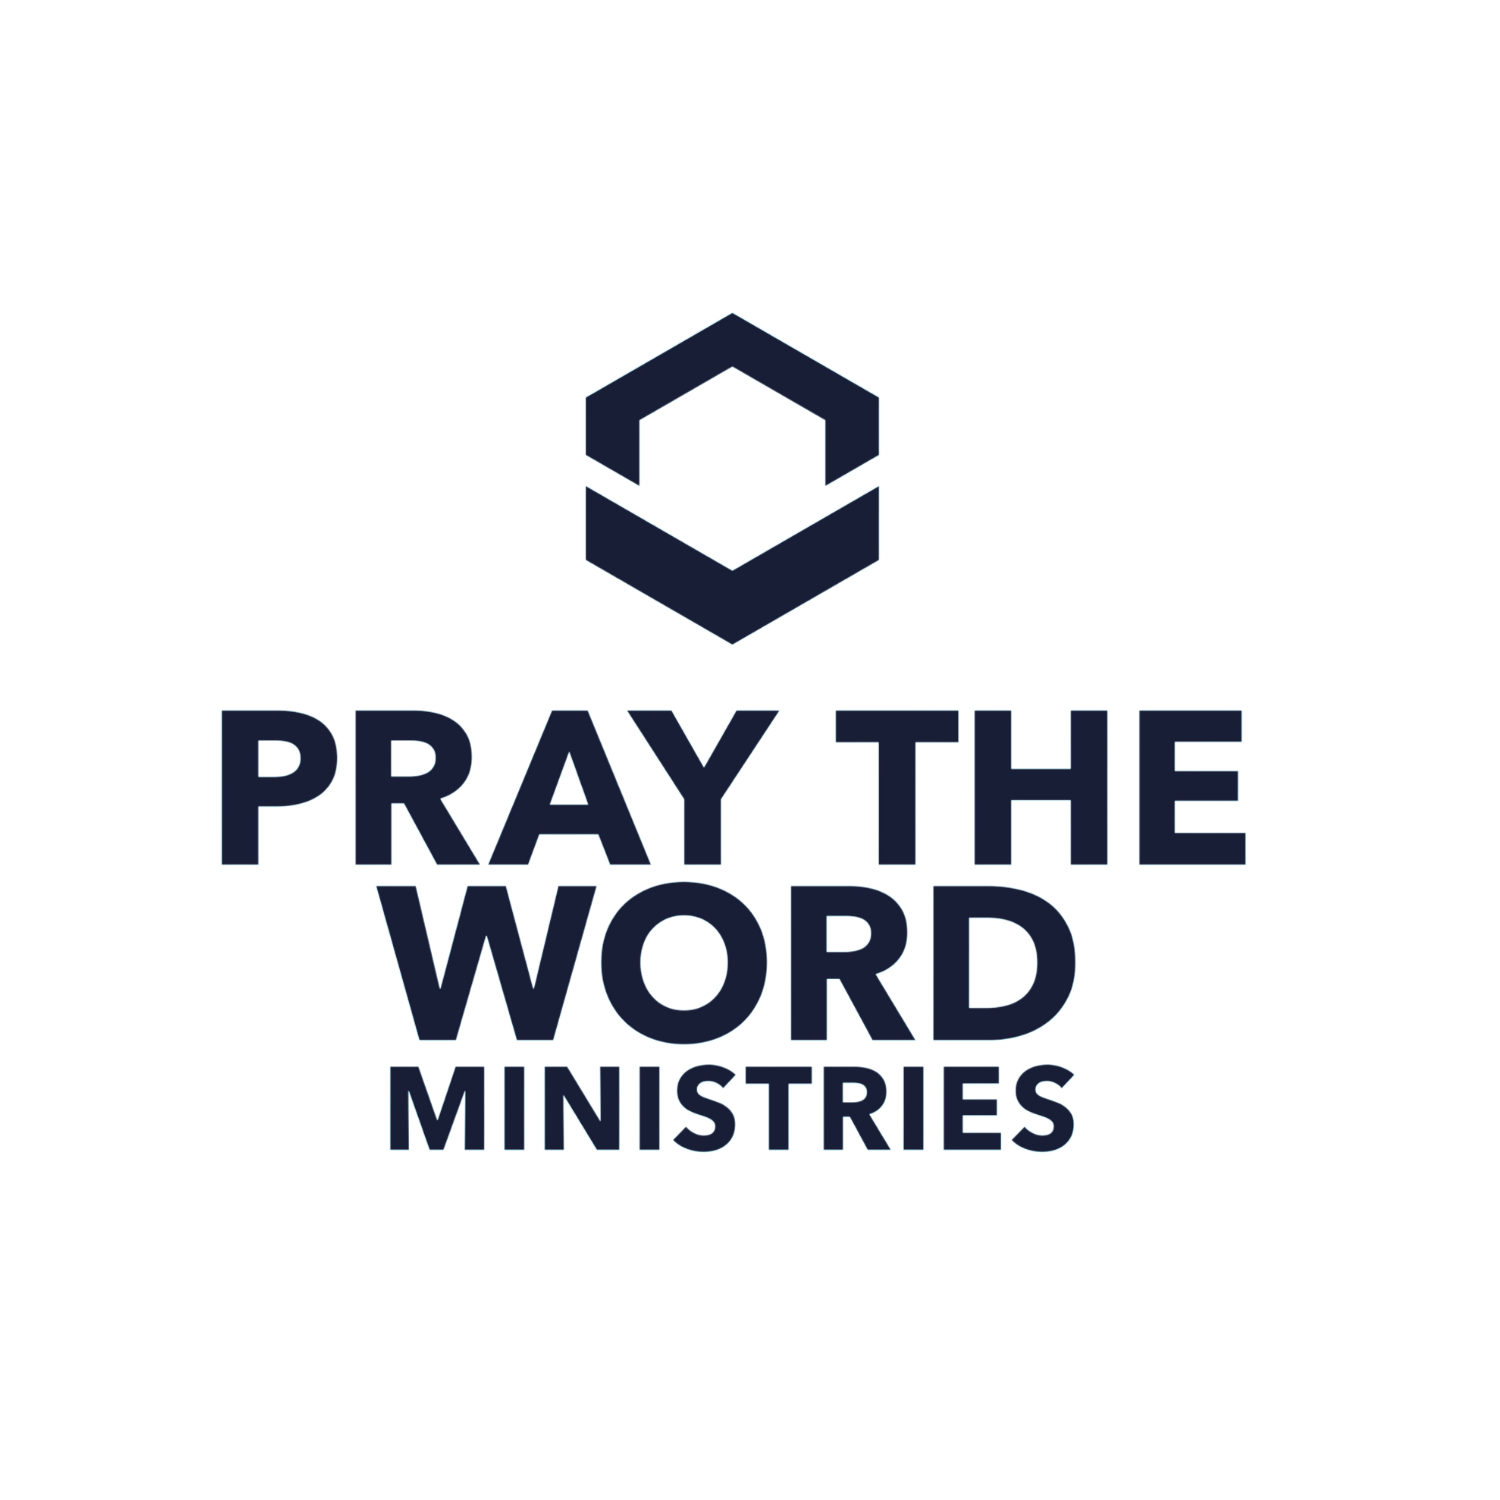 Pray the Word Ministries